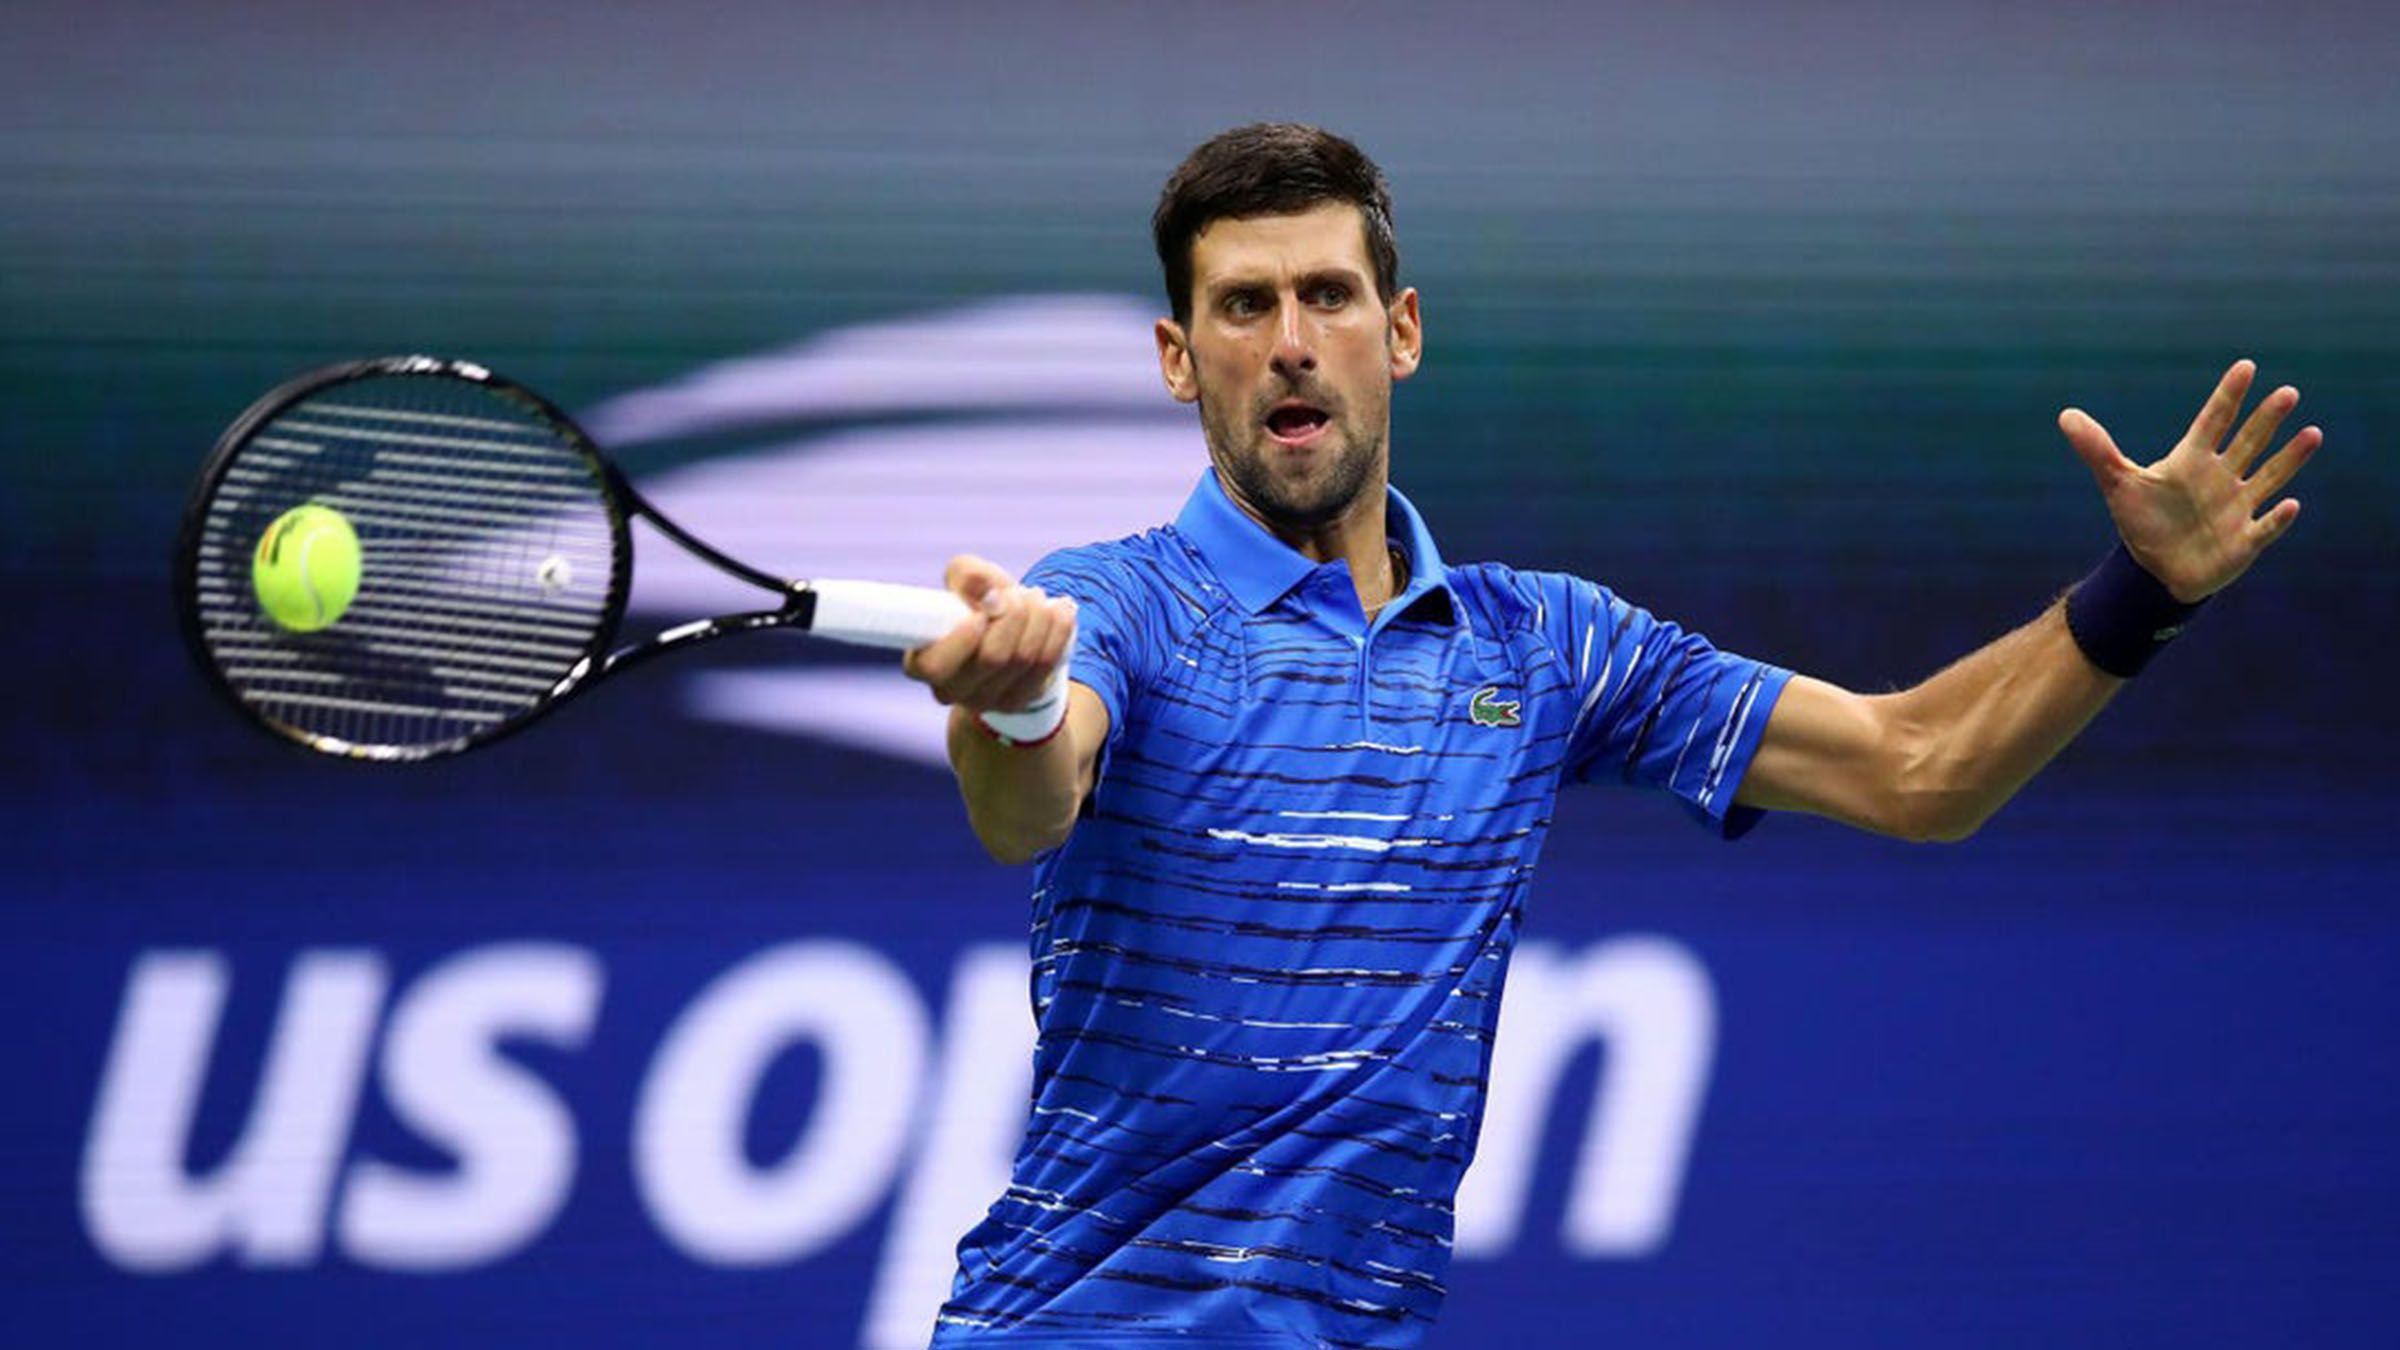 Unvaccinated Novak Djokovic can't play at the US Open